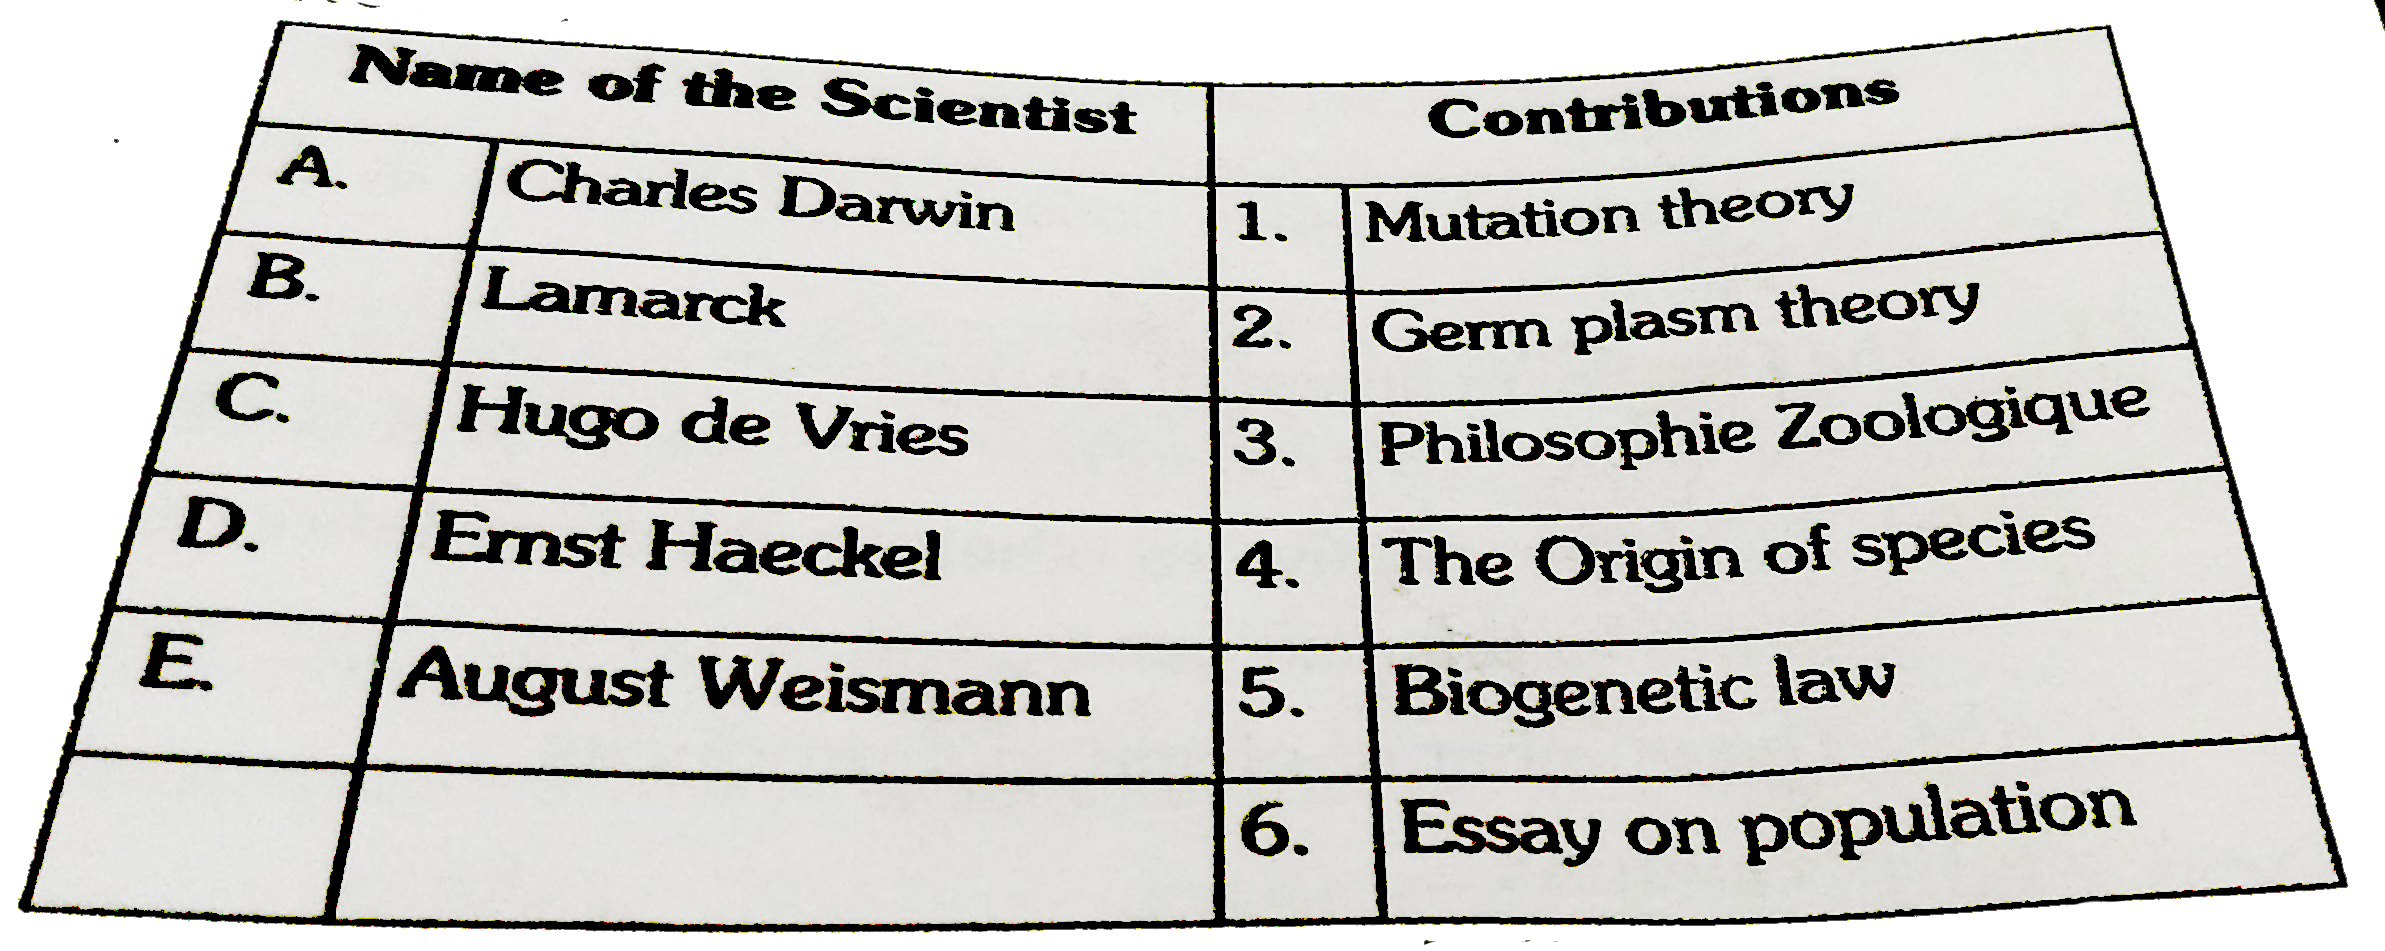 Match the scientists and their contributions in the field of evolution